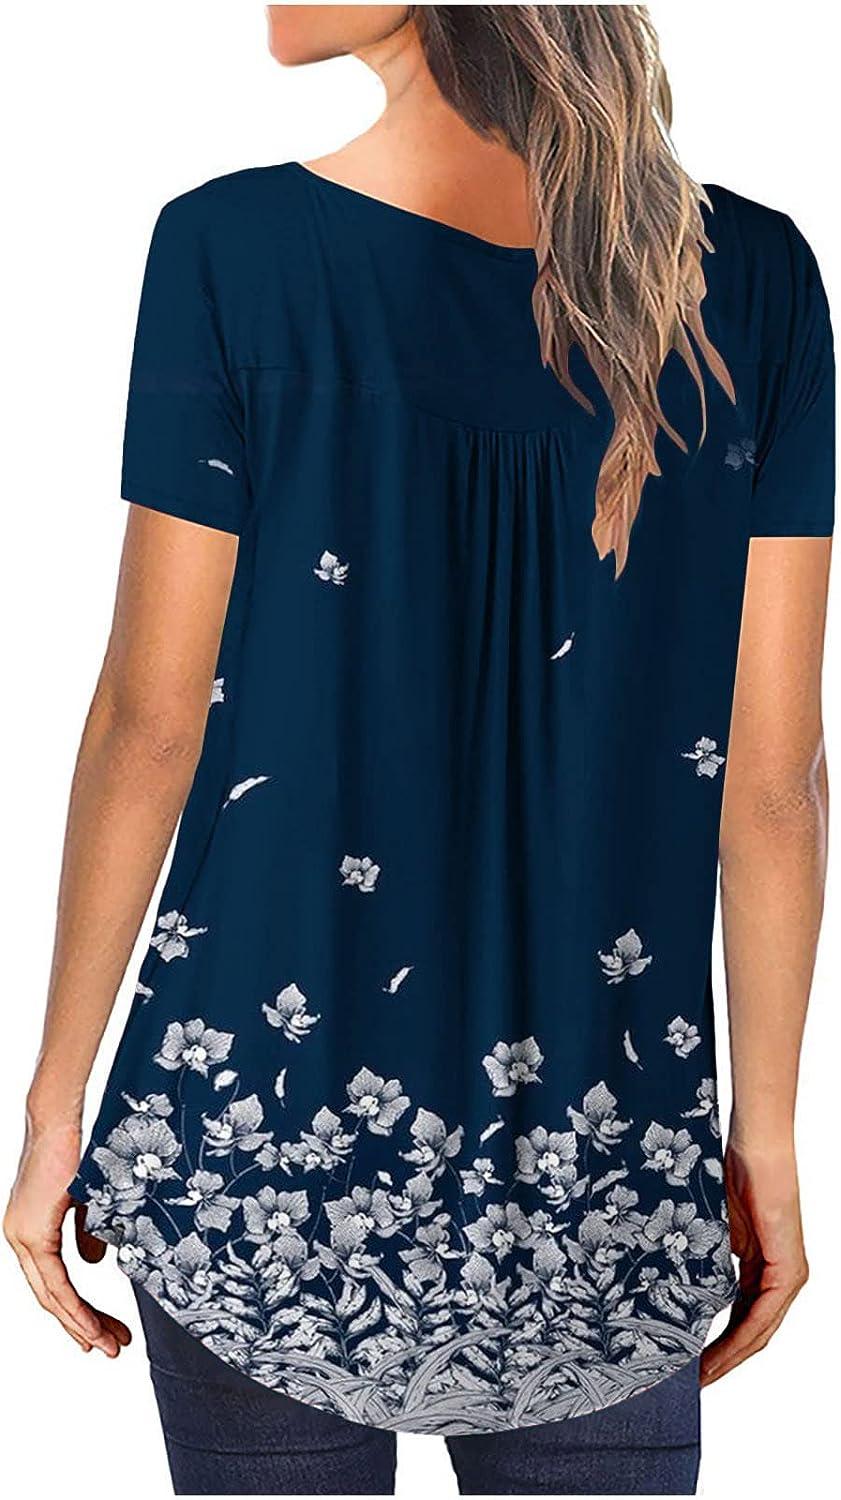 Women's Casual Tunic To Wear with Leggings Short-Sleeve Tops Print T-Shirt  Button Collar Summer Floral Tie Tops Cute Tshirts Dressy Casual Blouses  Valentines Day Sweatshirts for Teens